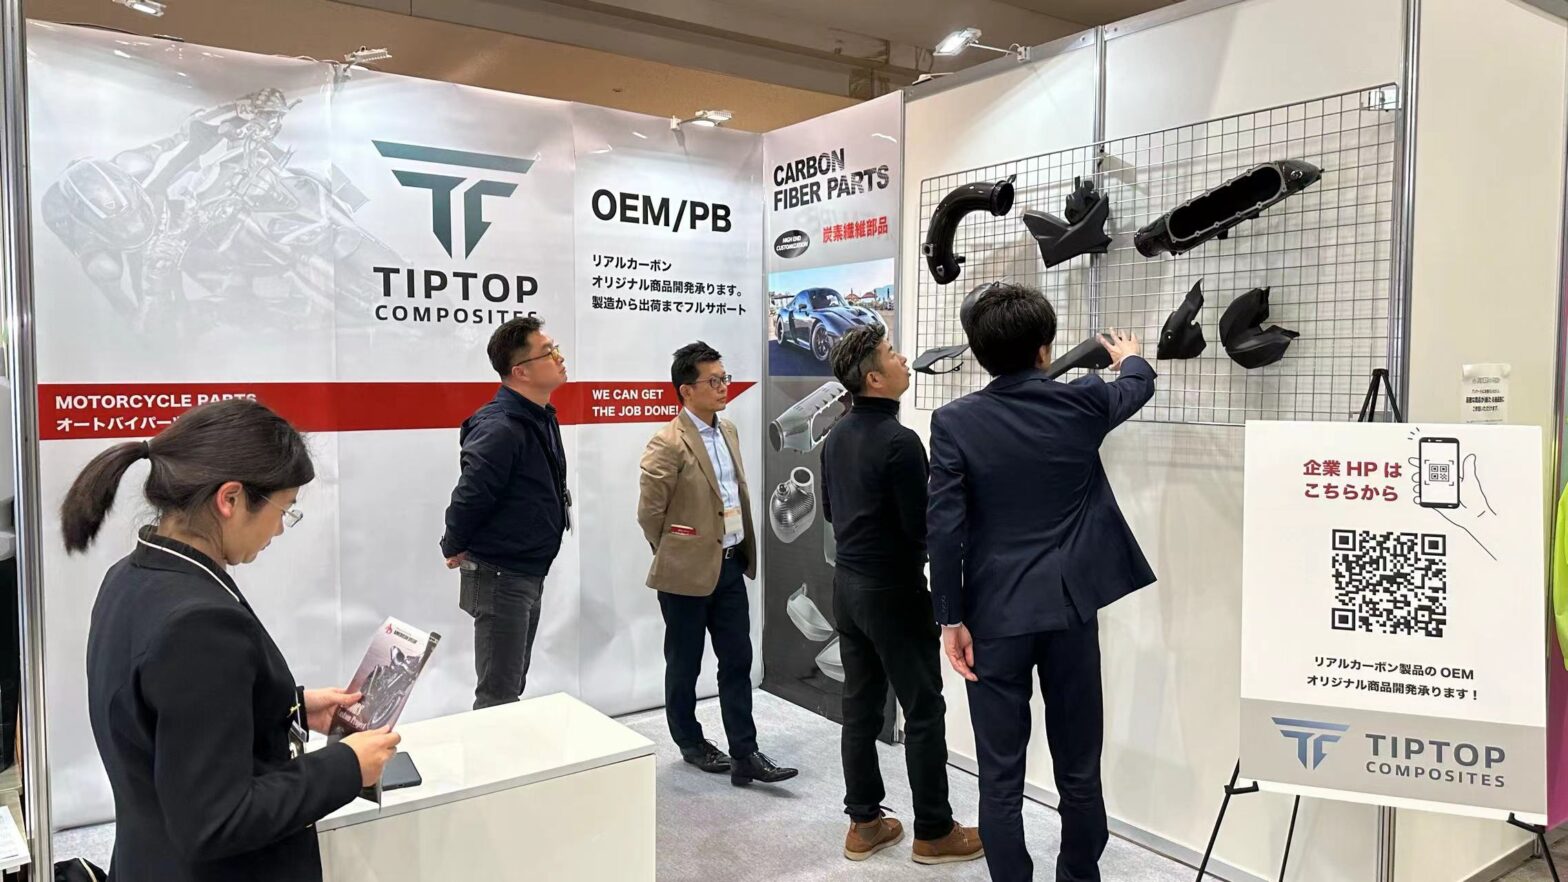 Tiptop Composites Co., Ltd. Shines at the 51st Motorcycle Parts Exhibition: A Triumph of Innovation and Excellence